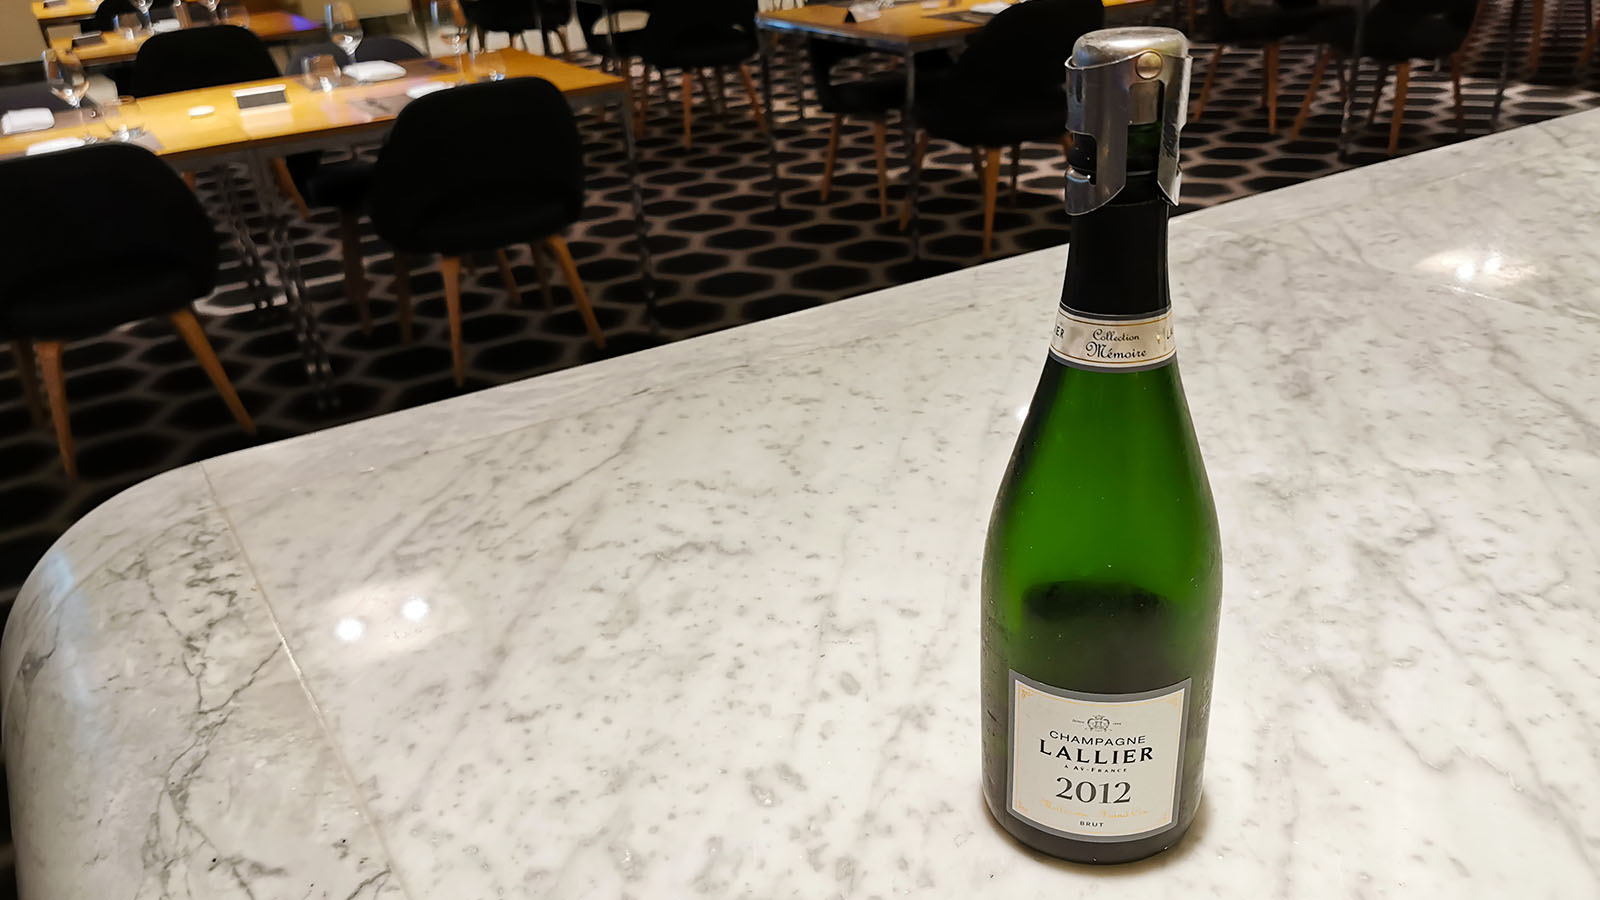 Lallier in the Qantas Los Angeles International First Lounge